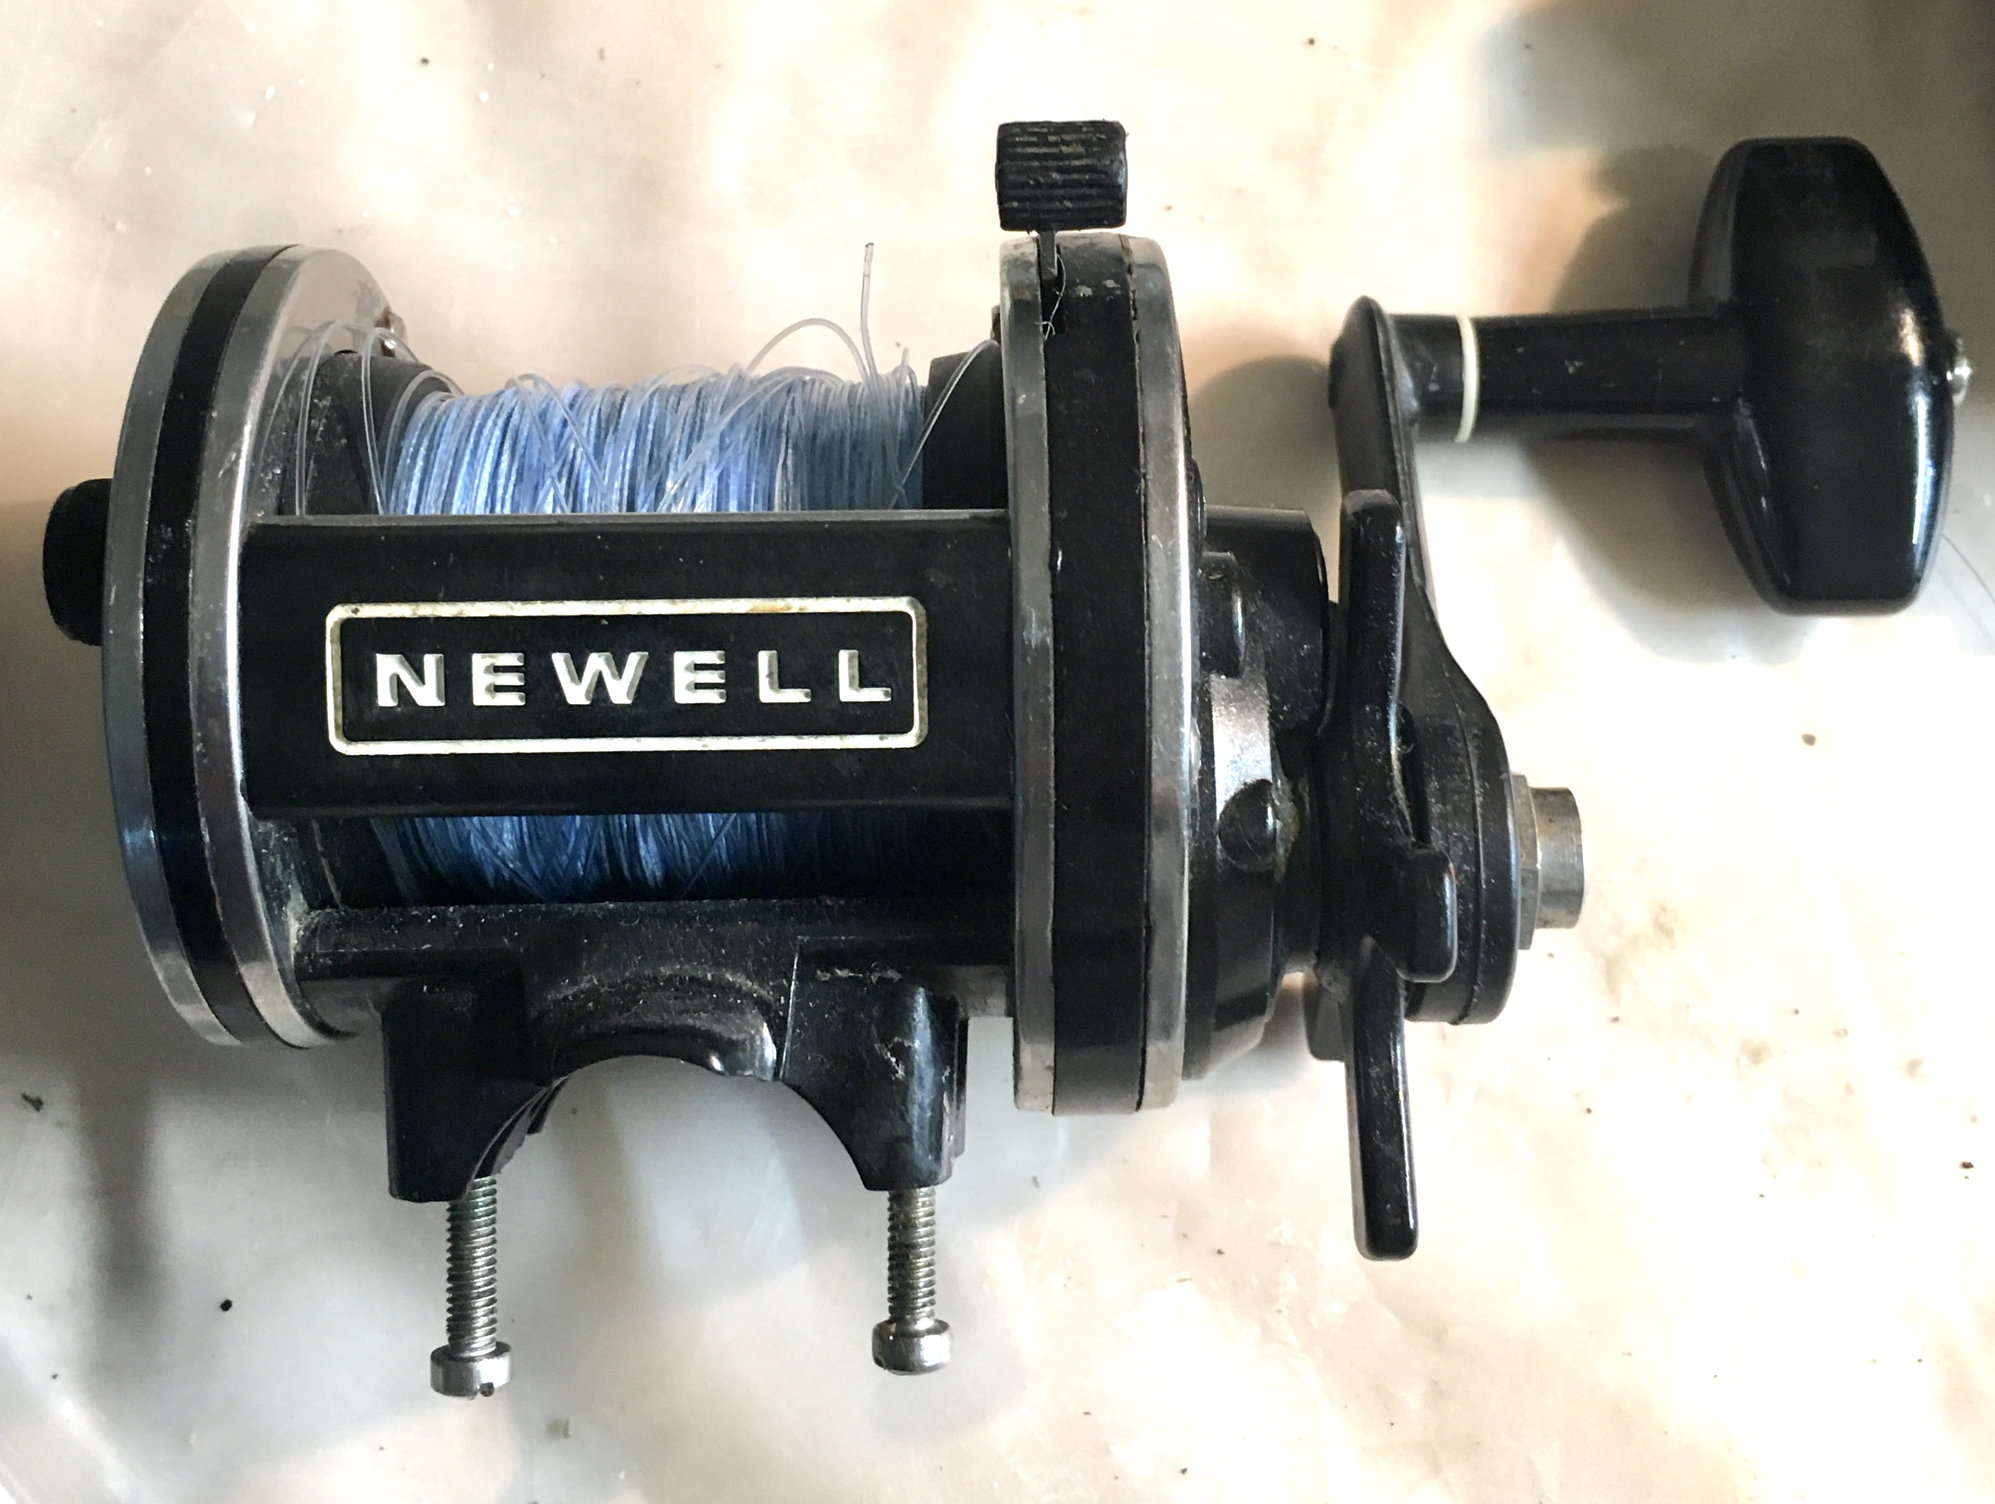 322-5 GRAPHITE NEWELL NARROW NO LETTER CLEAN 90'S REEL SS 5:1 HIGH